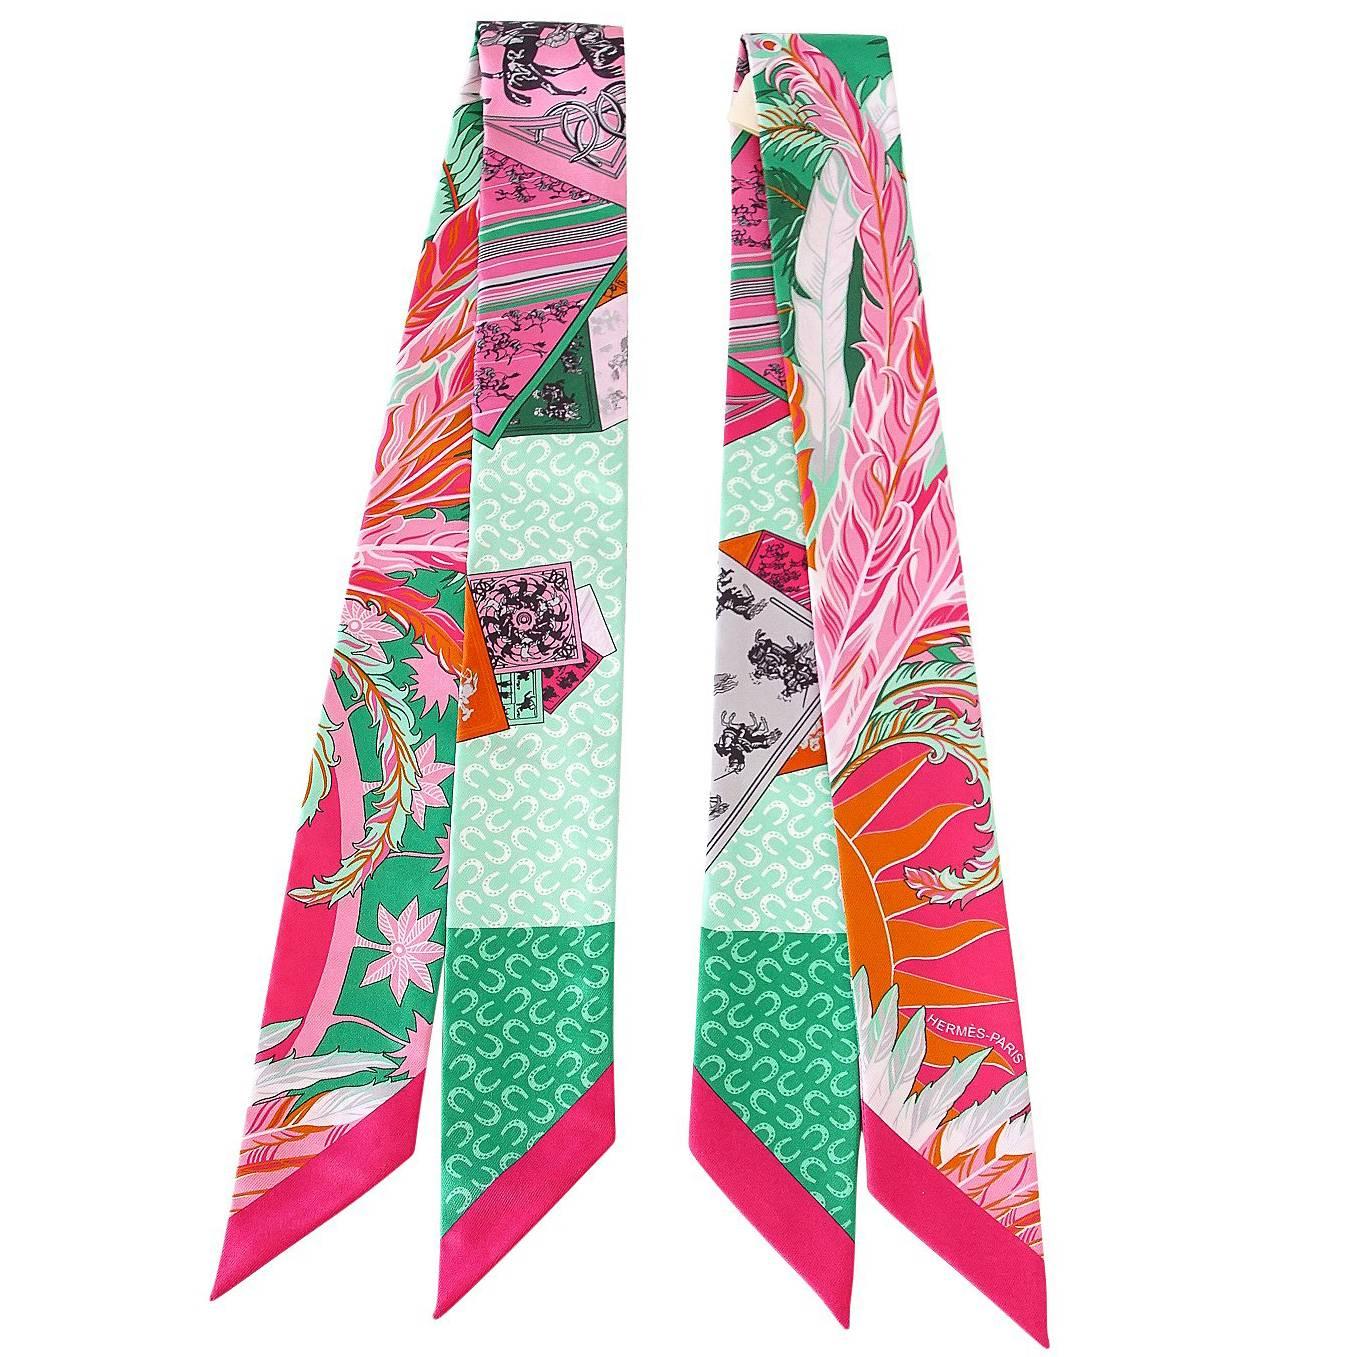 Hermes Twilly Cheval Phoenix Pink Multi Colour Set of 2 Glorious Summer